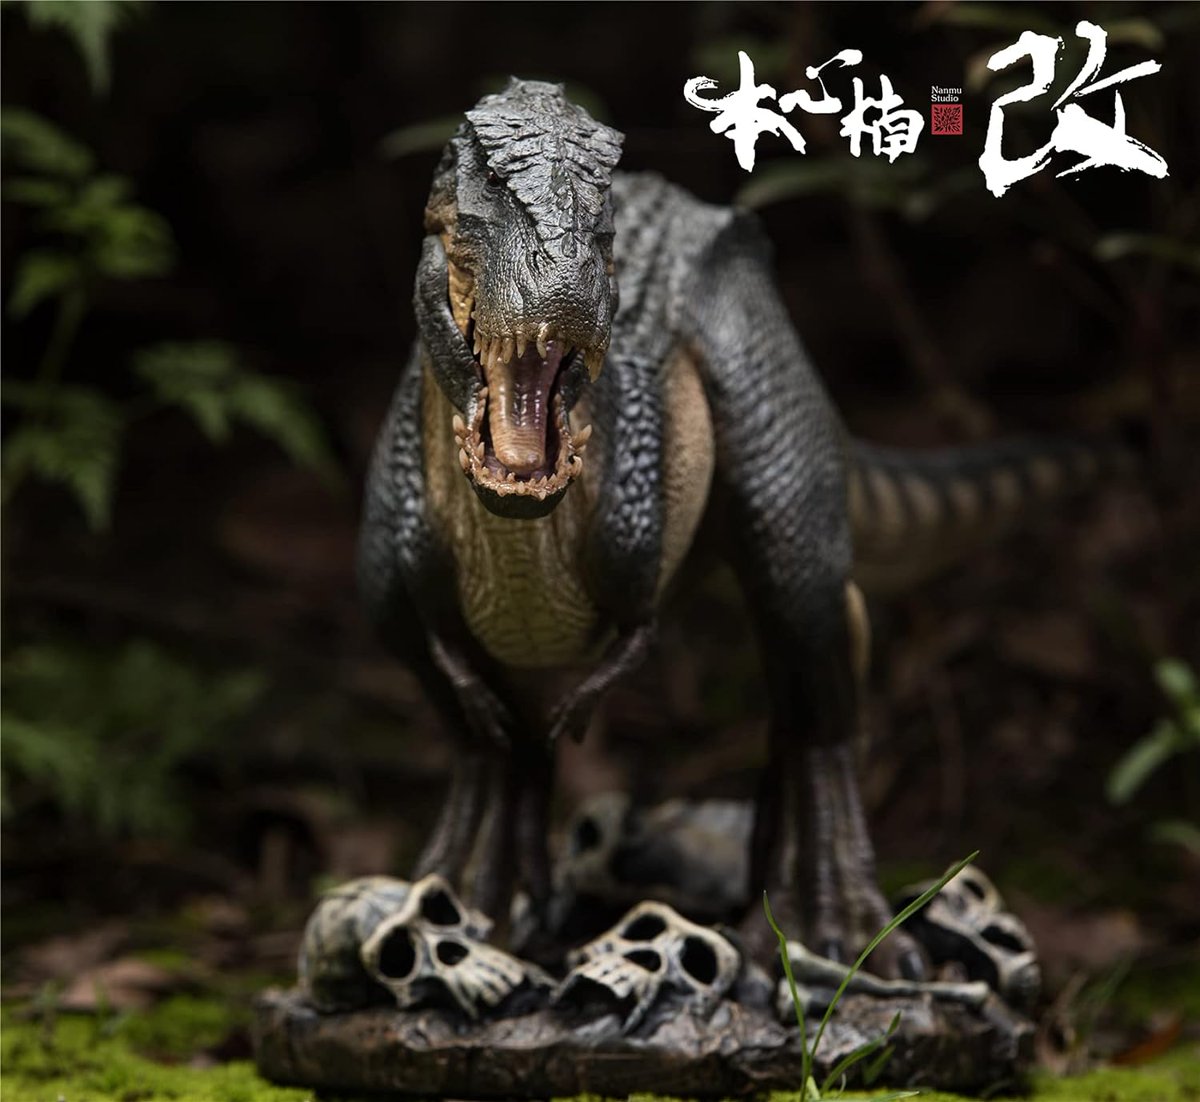 @collectjurassic @Mattel A little repaint and that's it! O.O